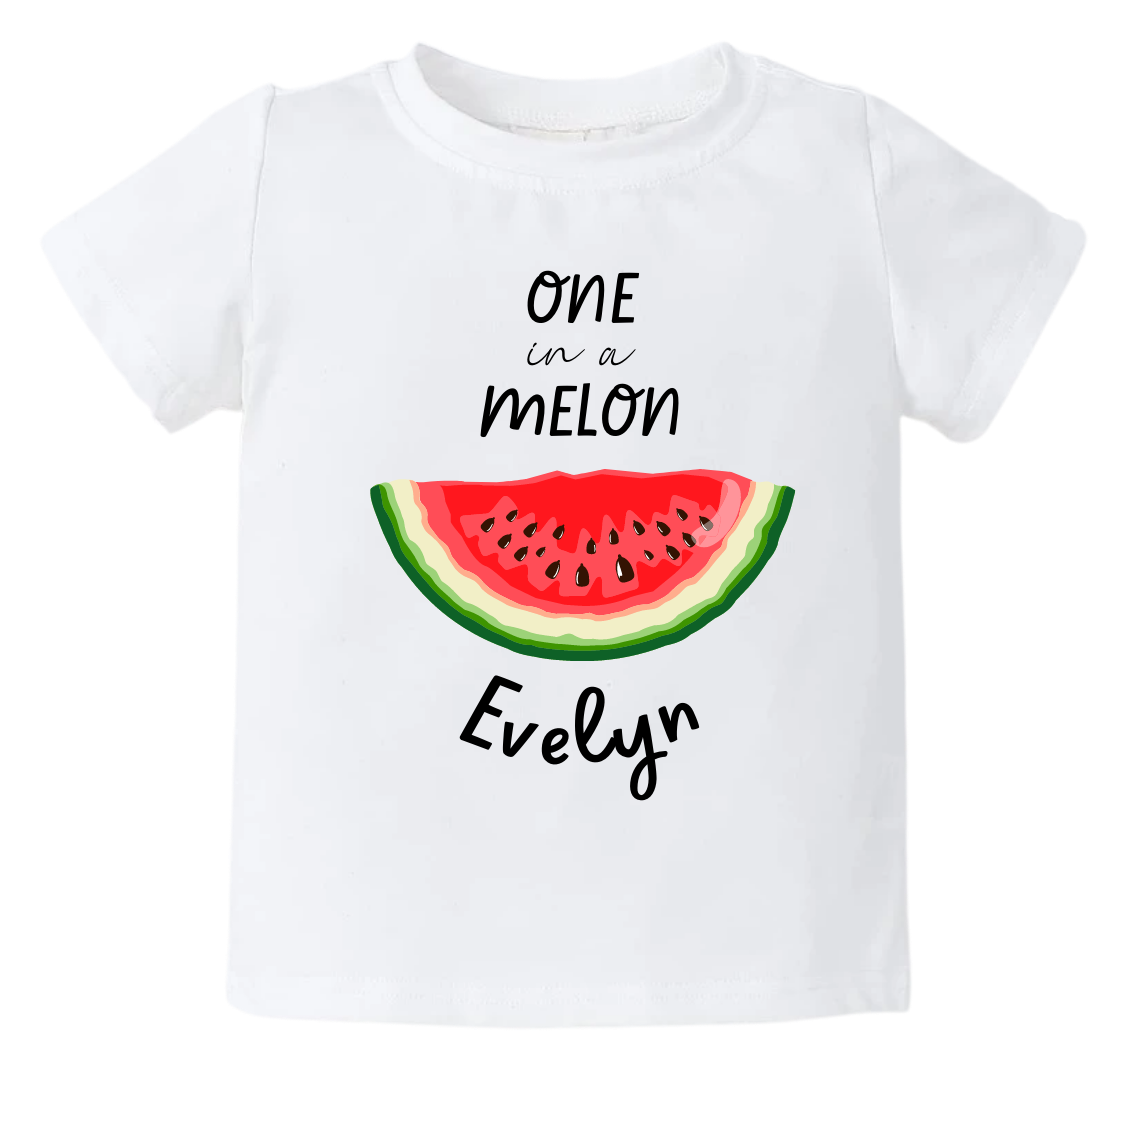 A delightful watermelon design on a kid's t-shirt and baby onesie, with the text 'On In A Melon.' The design can be personalized with customizable names, adding a touch of summer fun and sweetness to the outfit.